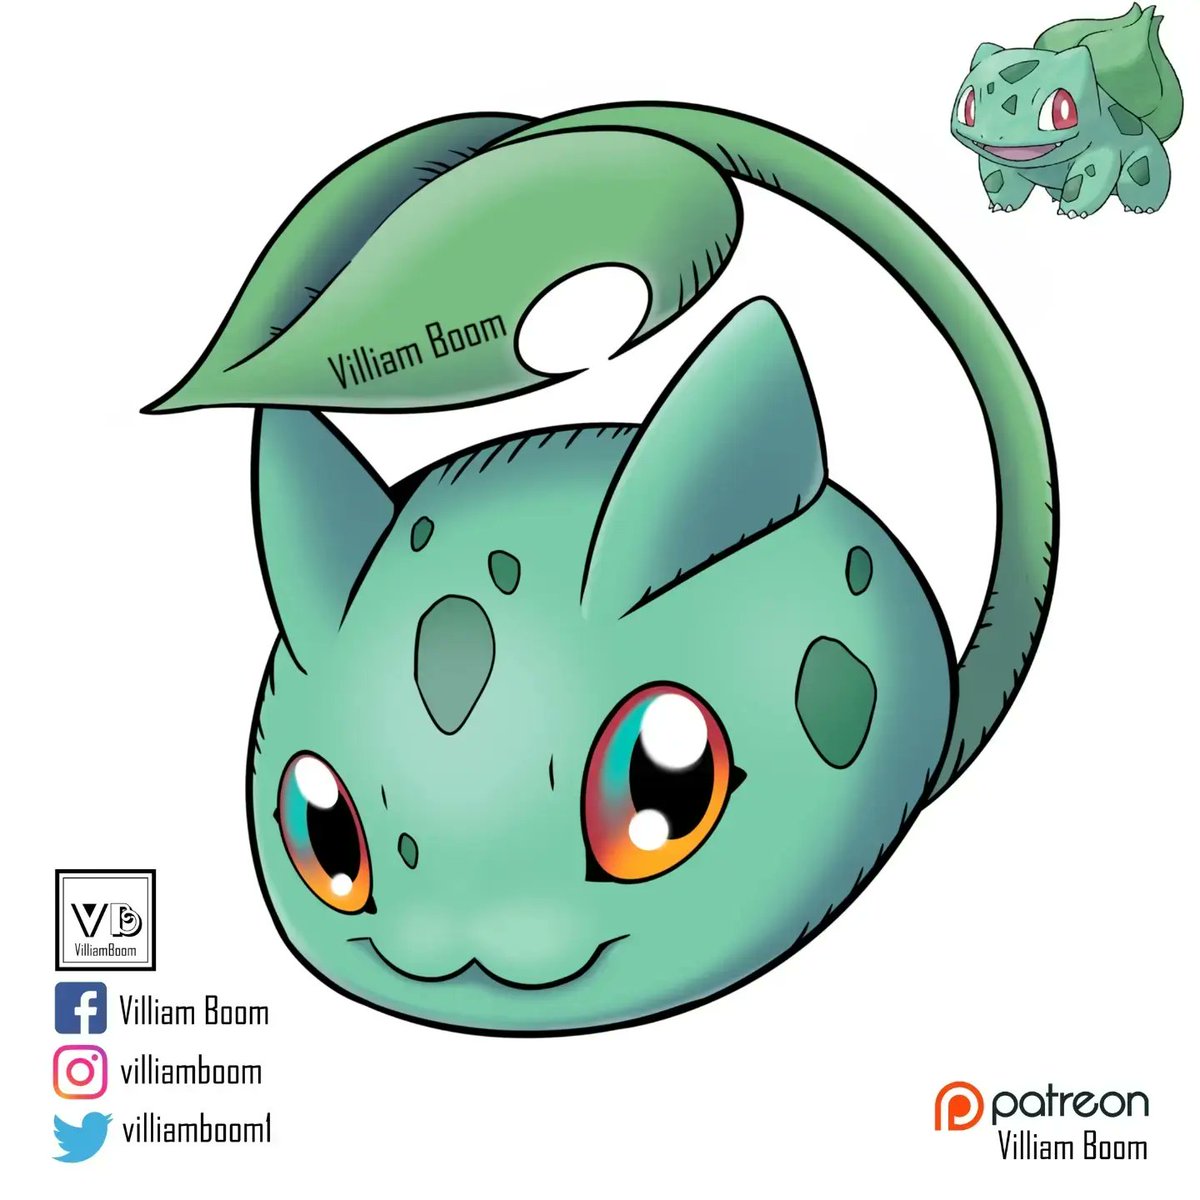 Bulbasaur as a baby digimon 

Bulbomon, baby stage Digimon.

This Digimon feeds on the sun's rays. uses its leaf to cover itself when it is already satisfied. If he is concentrated, he is able to make flowers grow around 

#digimon #digimonart #digimonadventure #DIGIMONSEEKERS